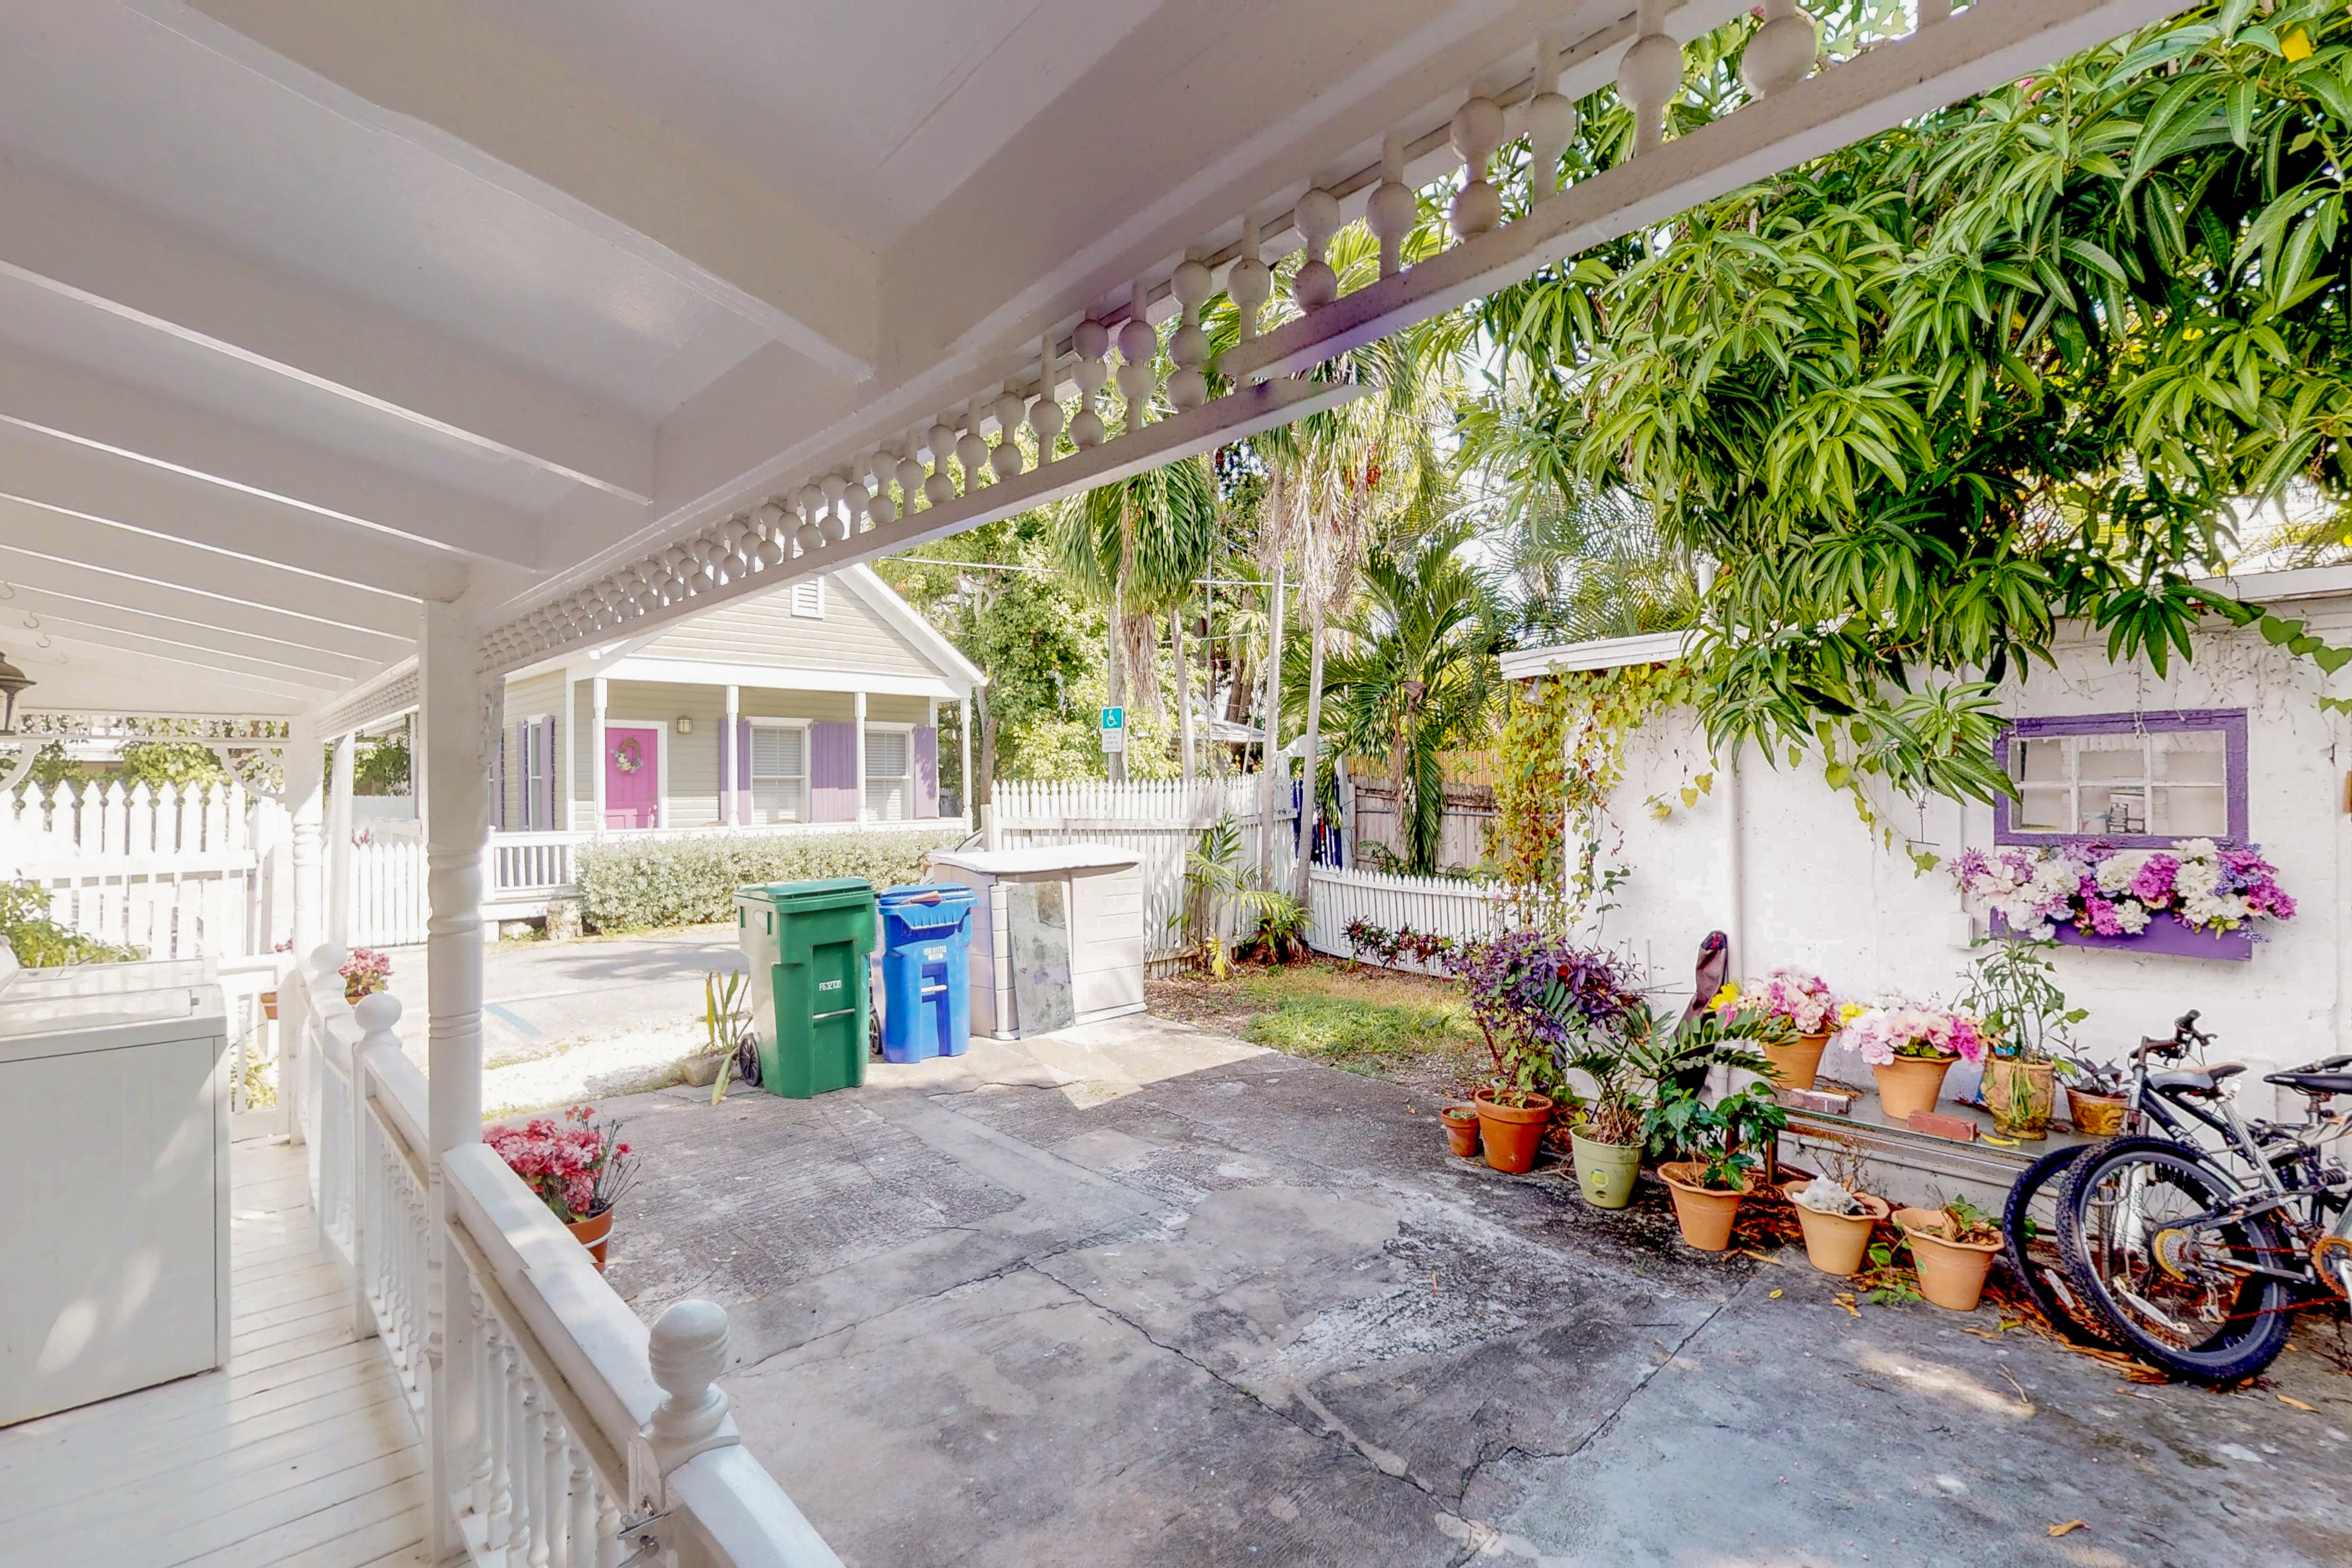 Gingerbread House / Cottage rental in Beach House Rentals Key West in Key West Florida - #23